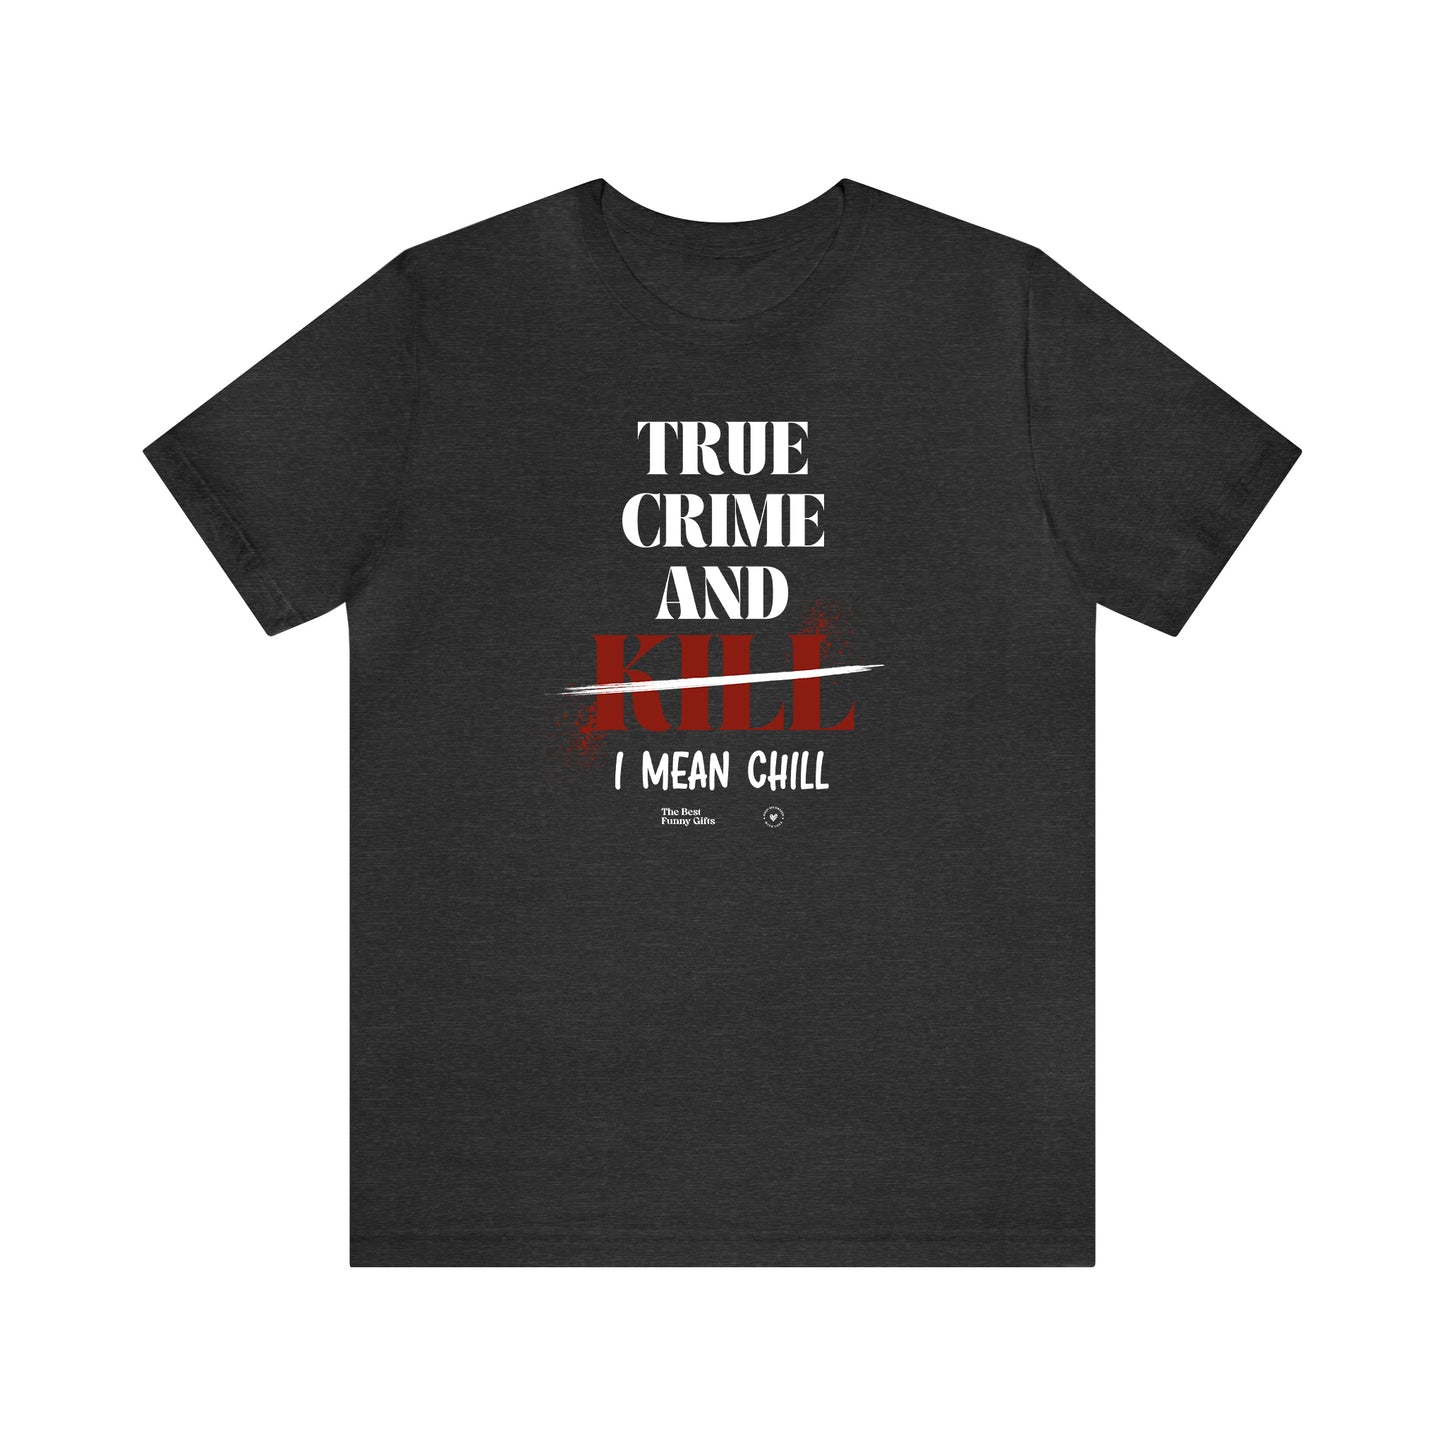 Funny Shirts for Women - True Crime and Kill... I Mean Chill - Women’s T Shirts